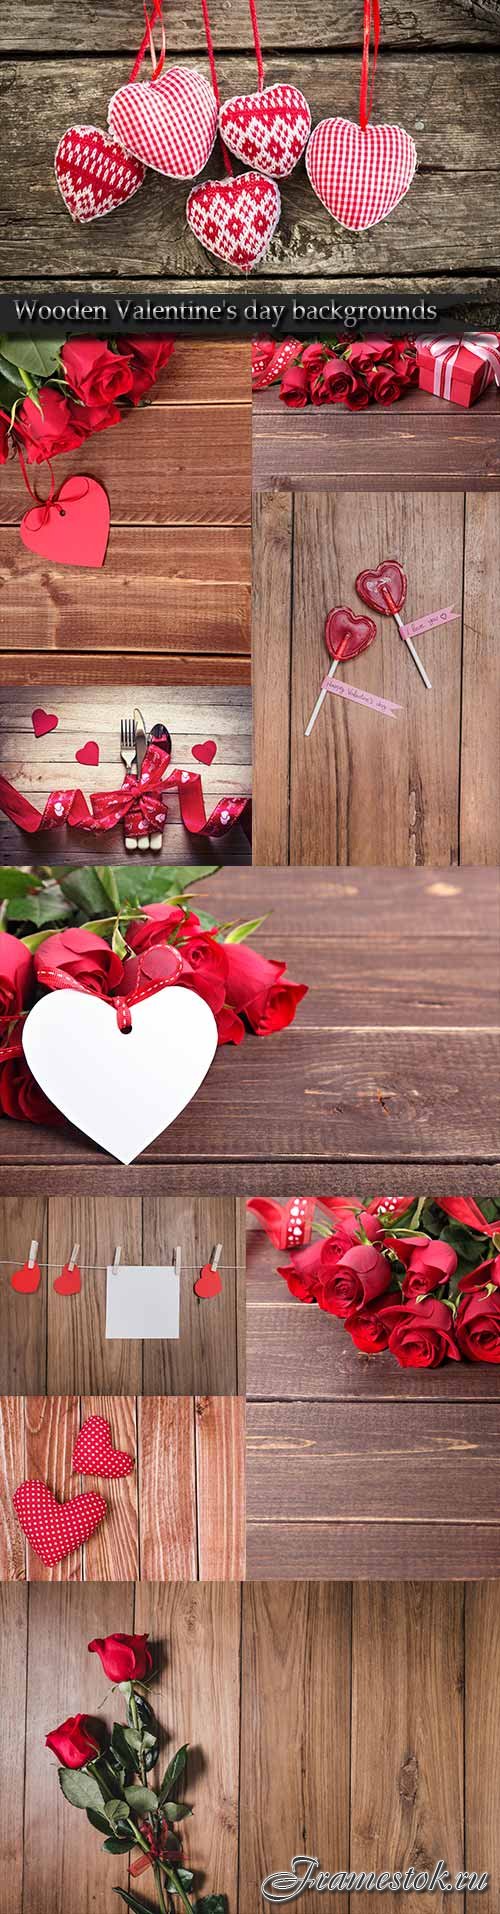 Wooden Valentine's day backgrounds